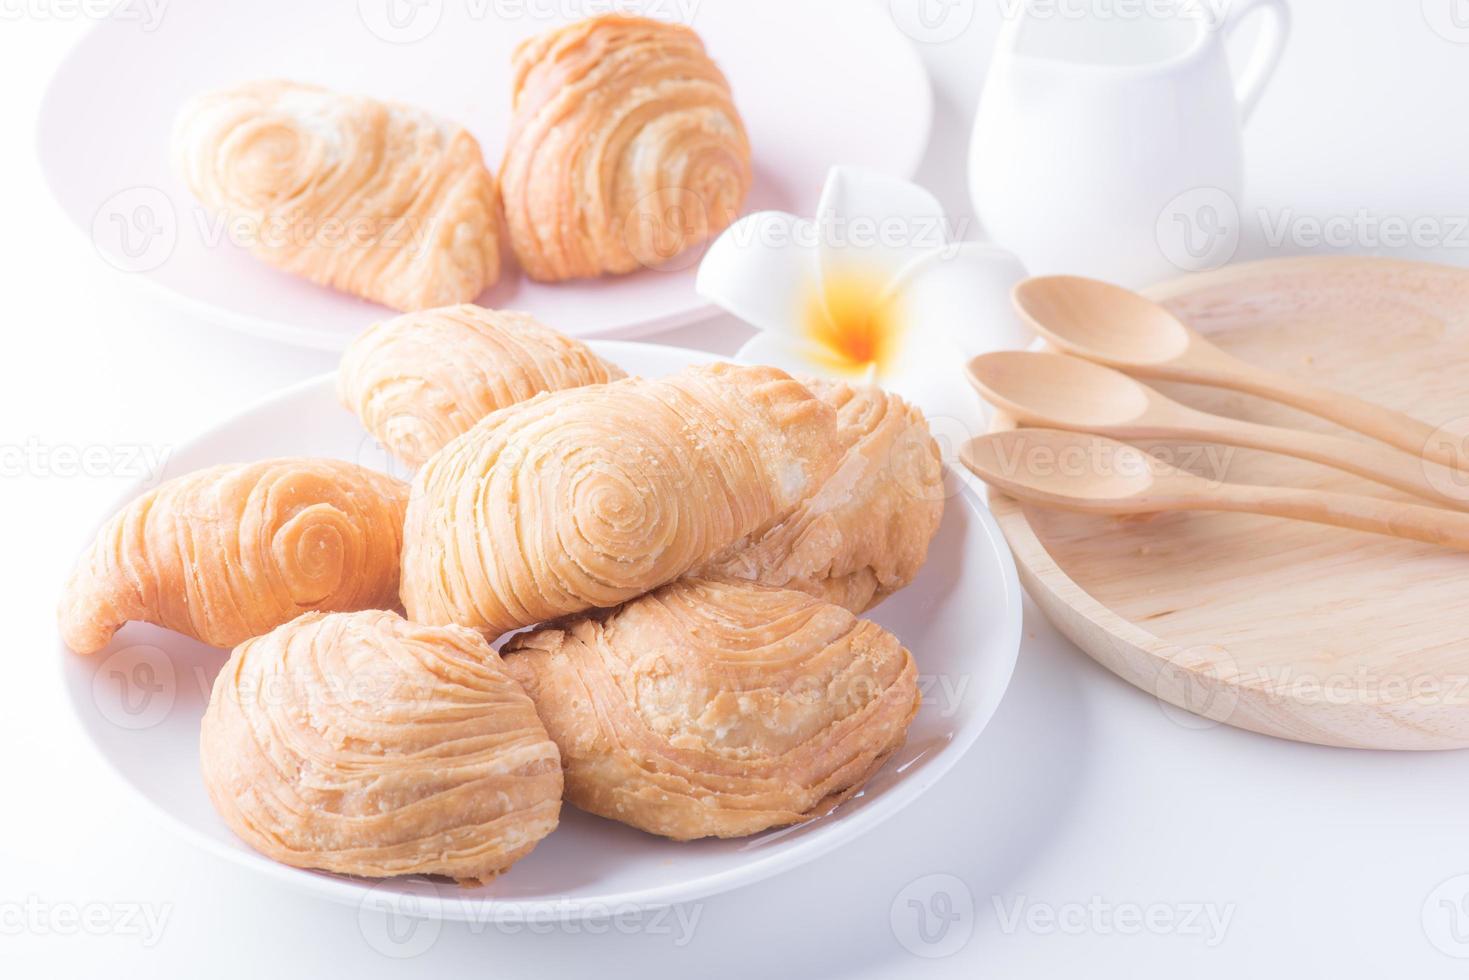 Curry puffs are a very popular snack item to have been adapted from Amphoe Muak Lek, Saraburi province in central Thailand photo